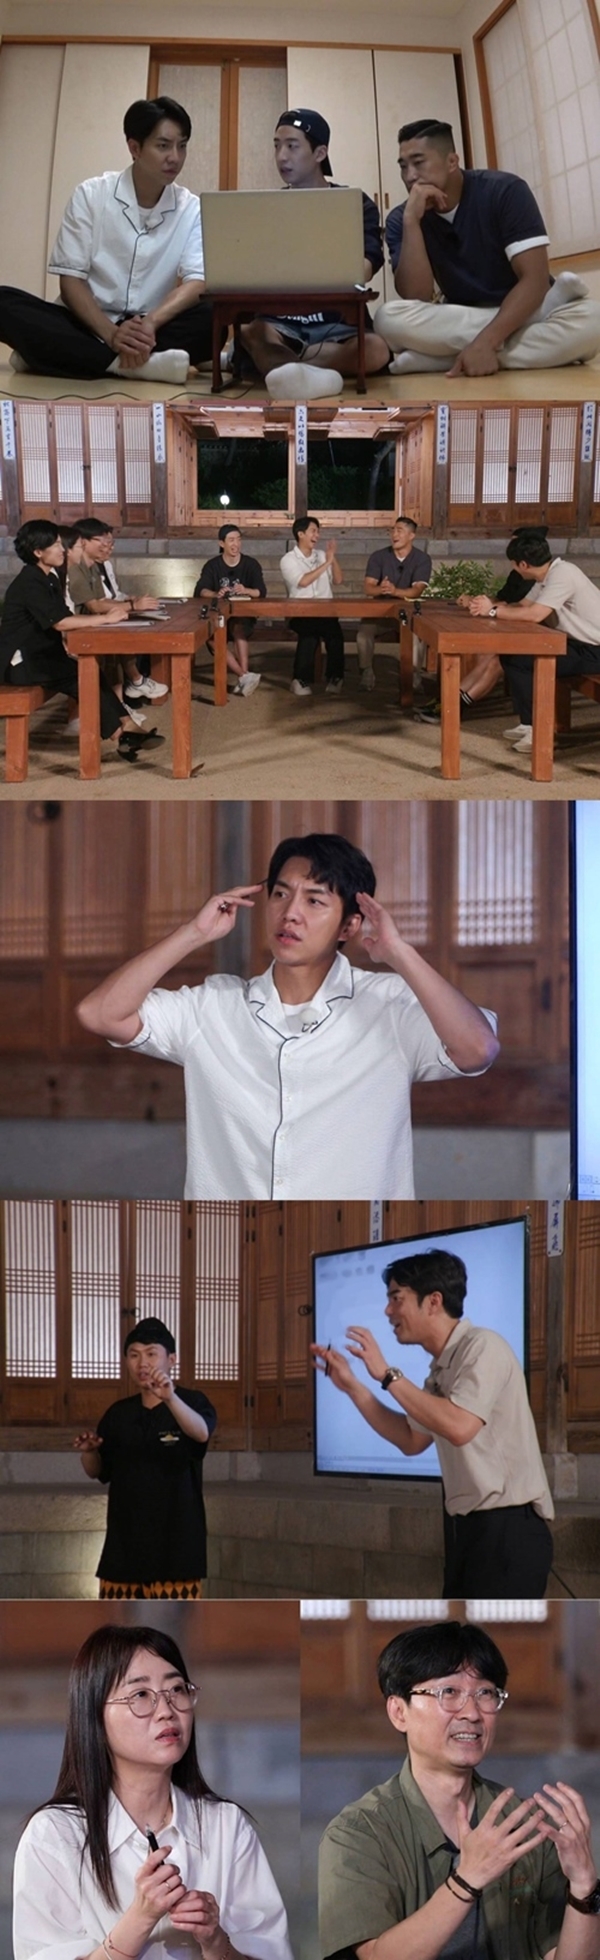 Genre Animals of All The Butlers members are expecting Fairytale.In SBS entertainment All The Butlers, which will be broadcast on the evening of the 12th, Genre Animals, a member of Kim Eun-hees Daily Writers Team, will be released.Following last week, the show depicts members who became Kim Eun-hees Daily Writers Team adapting the traditional Fairytale as Genre Animals.The members are said to have shown a passionate appearance to meet and cover the actual Kim Eun-hees assistants.The passions of each teams Synopsys conferences were constant, and both teams were enthusiastic about the idea of ​​falling waterfalls and devoted themselves to the creation of Synopsys.In particular, Jeon Seok-ho, a daily student, immersed in the role of Synopsys, exploding explosive acting skills and making the scene furious.Indeed, the two teams Genre Animals traditional Fairytale raises expectations about what story and reversal they will have.Later, Synopsys presentation time, Kim Eun-hees assistant, Sam In-bang, became a judge to fairly evaluate the Synopsys of the members.Ha Hong-il, the prosecutor Seo In-sun, and Jang Hang-jun continued their detailed examination by utilizing their own expertise.In particular, director Jang Hang-jun and Kim Eun-hee presented the direction of the members Synopsys and gave an idea.The two of them are the back door of the writers couple and have been active as masters. They also said that they have even sounded the hearts of the members who announced Synopsys.The honor of winning the first prize, Kim Eun-hees Notebook, is expected by the traditional Fairytale, which is adapted by members who transformed into daily writers into Genre Animals.